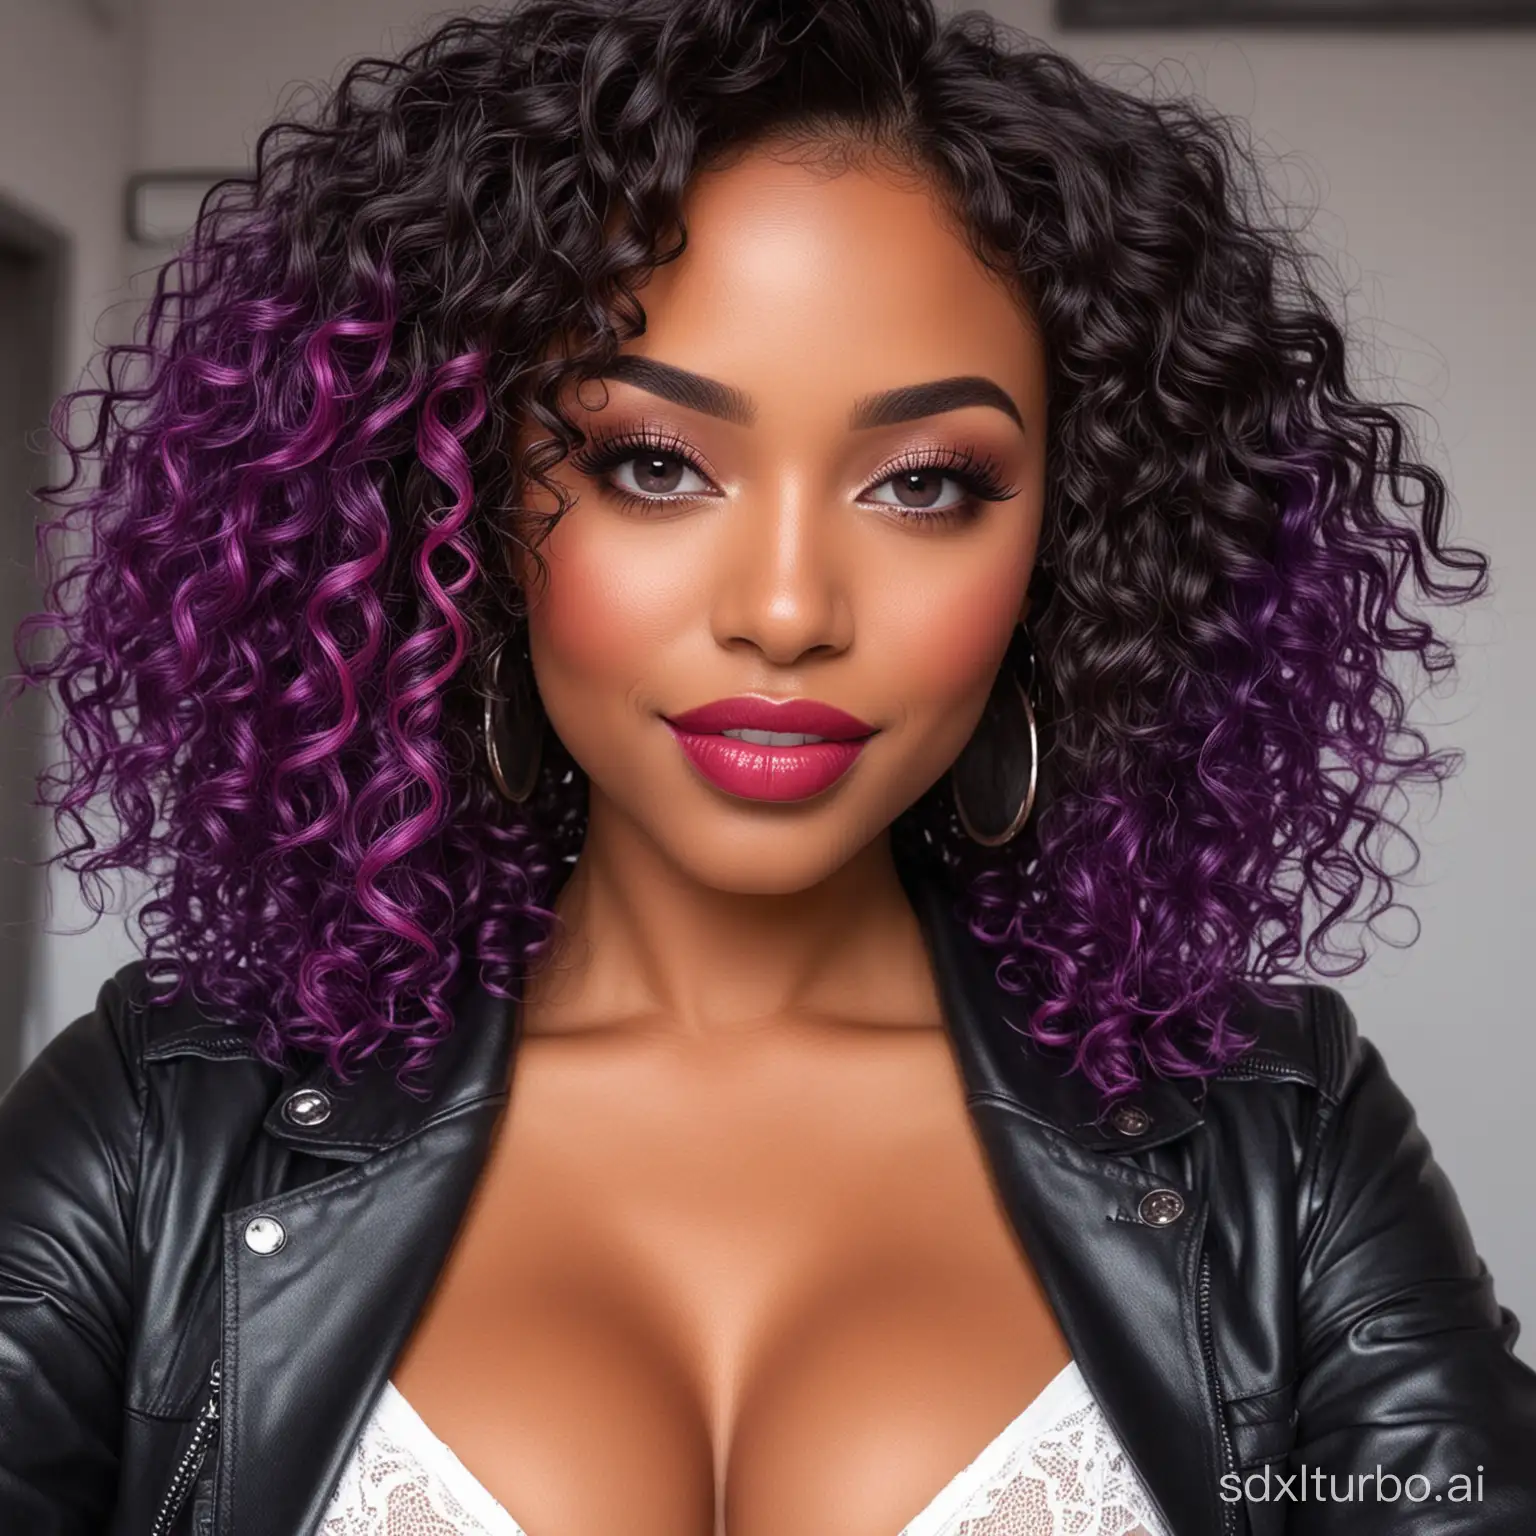 A sexy black lady from Portugal, a sexy and charming smile, oval face, purple eyes, the lips are painted with rose red lipstick, blue highlight dyed hair, sexy and charming micro curly hairstyle, wearing white tight underwear inside, black leather jacket